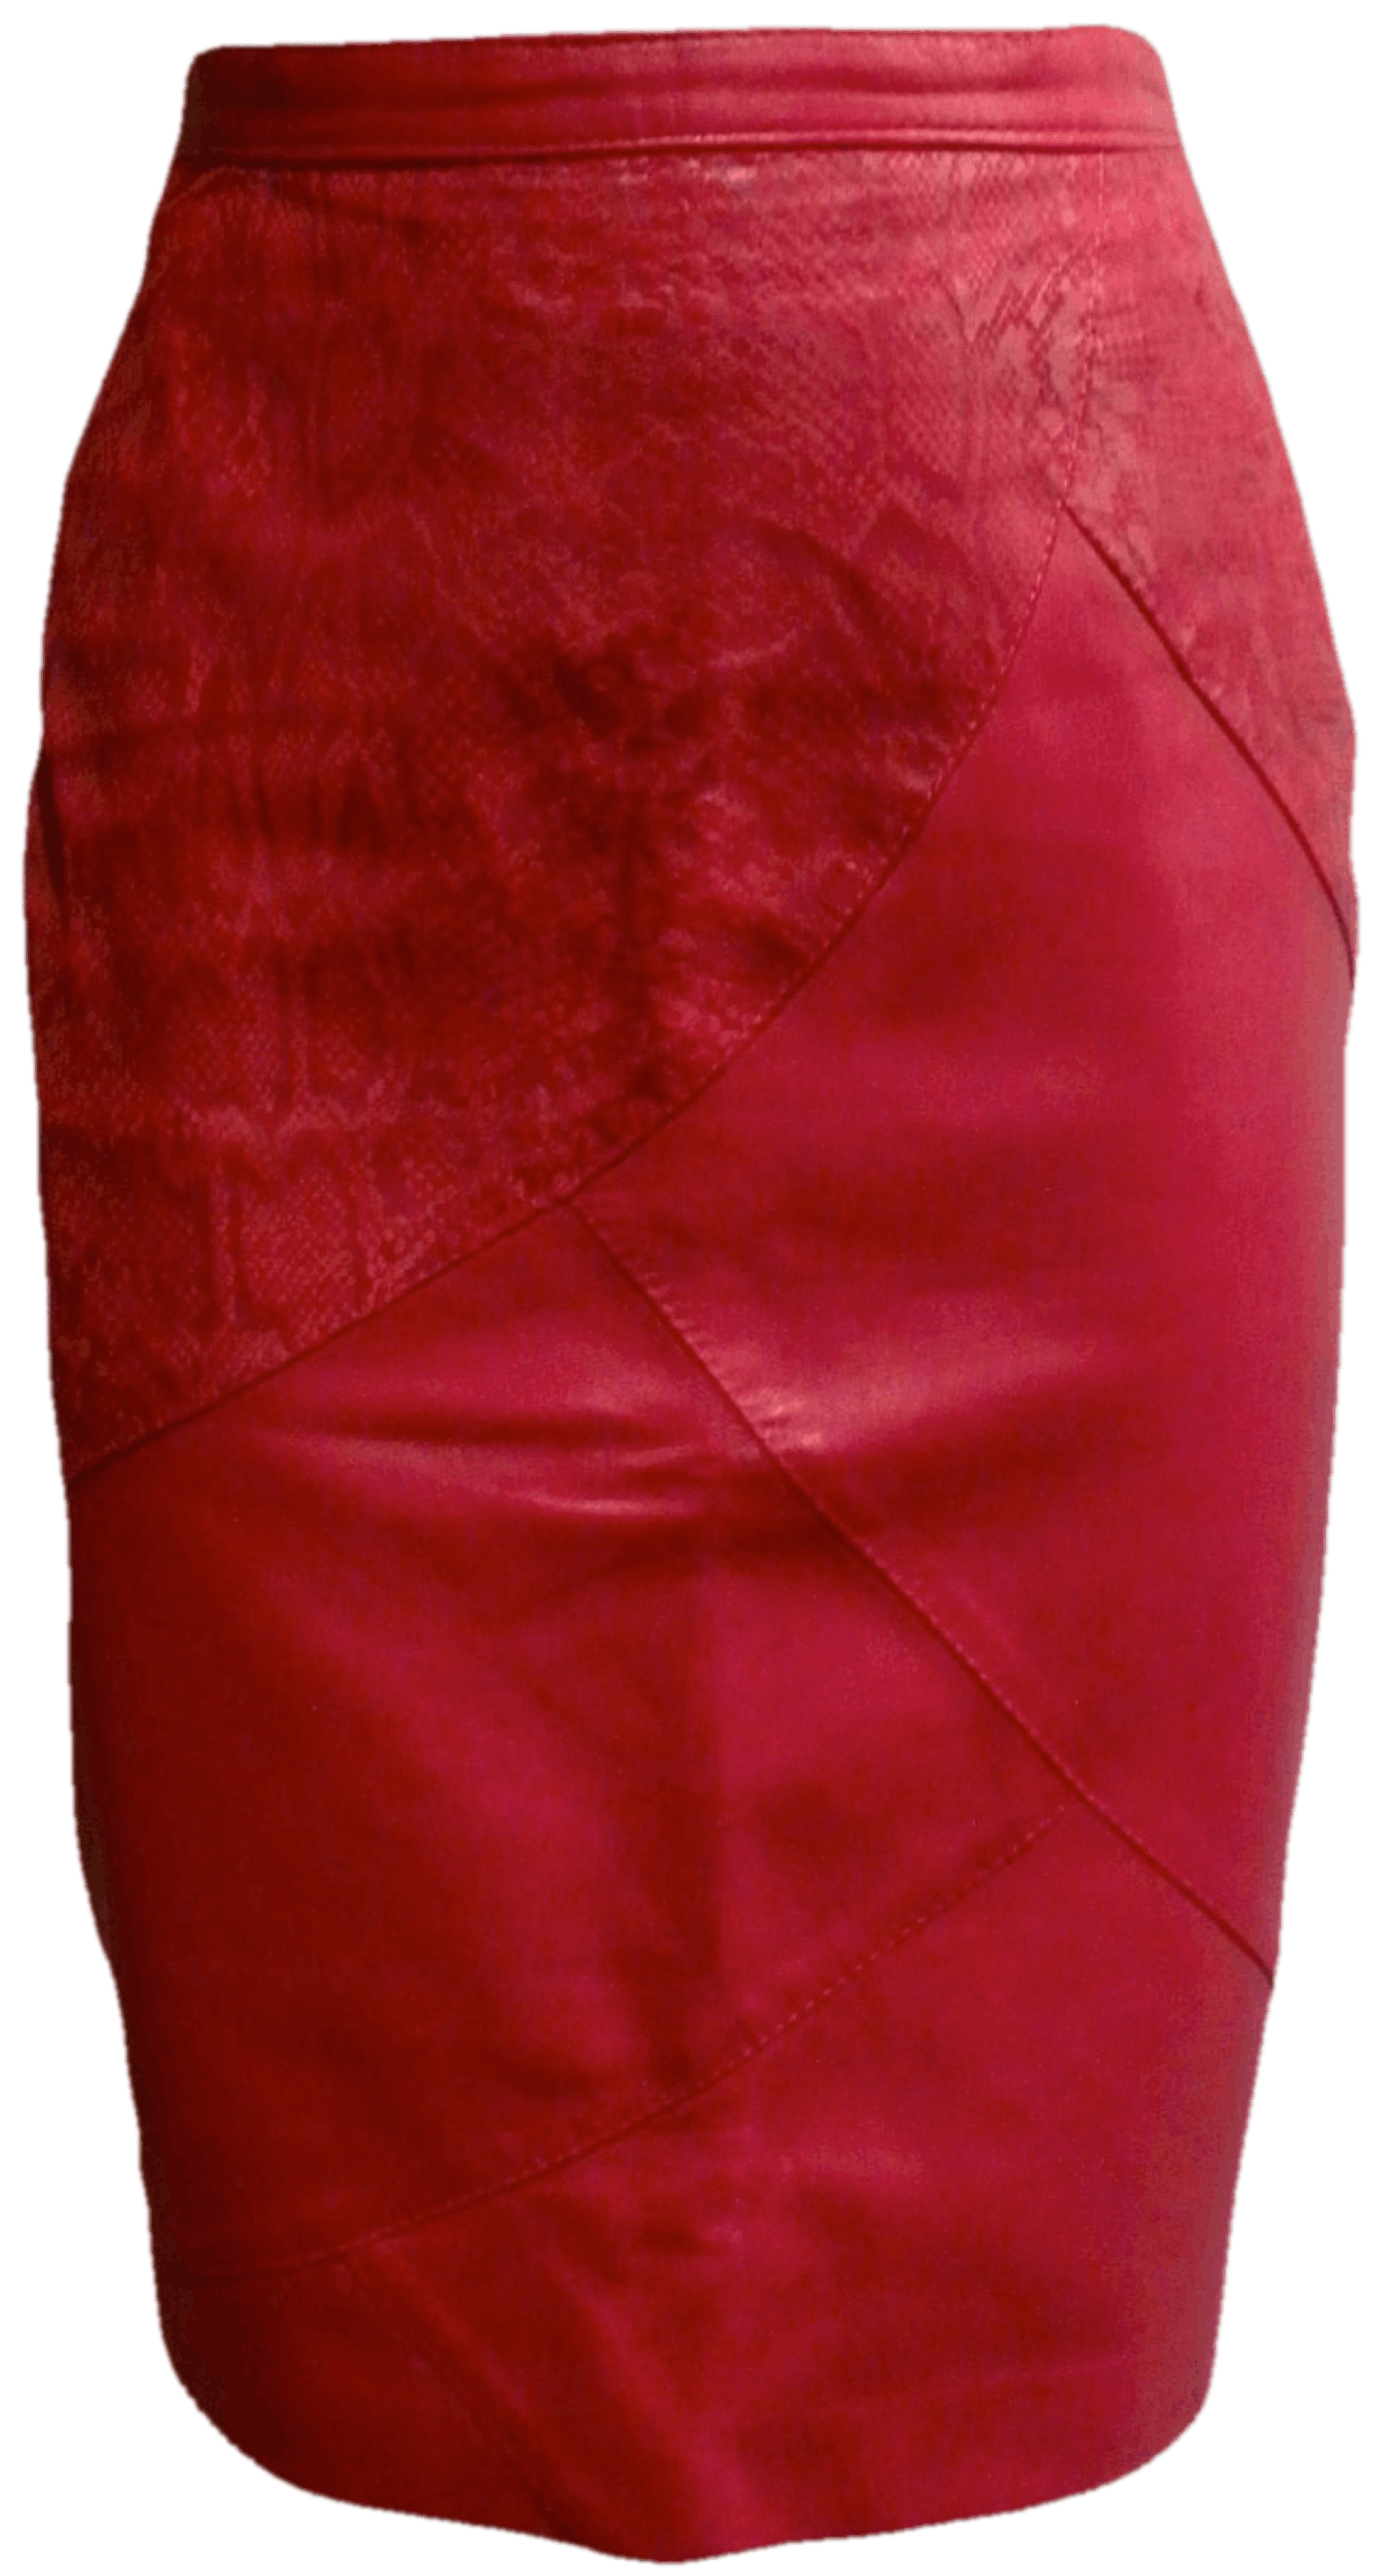 Red Leather Skirt with Snakeskin Print 